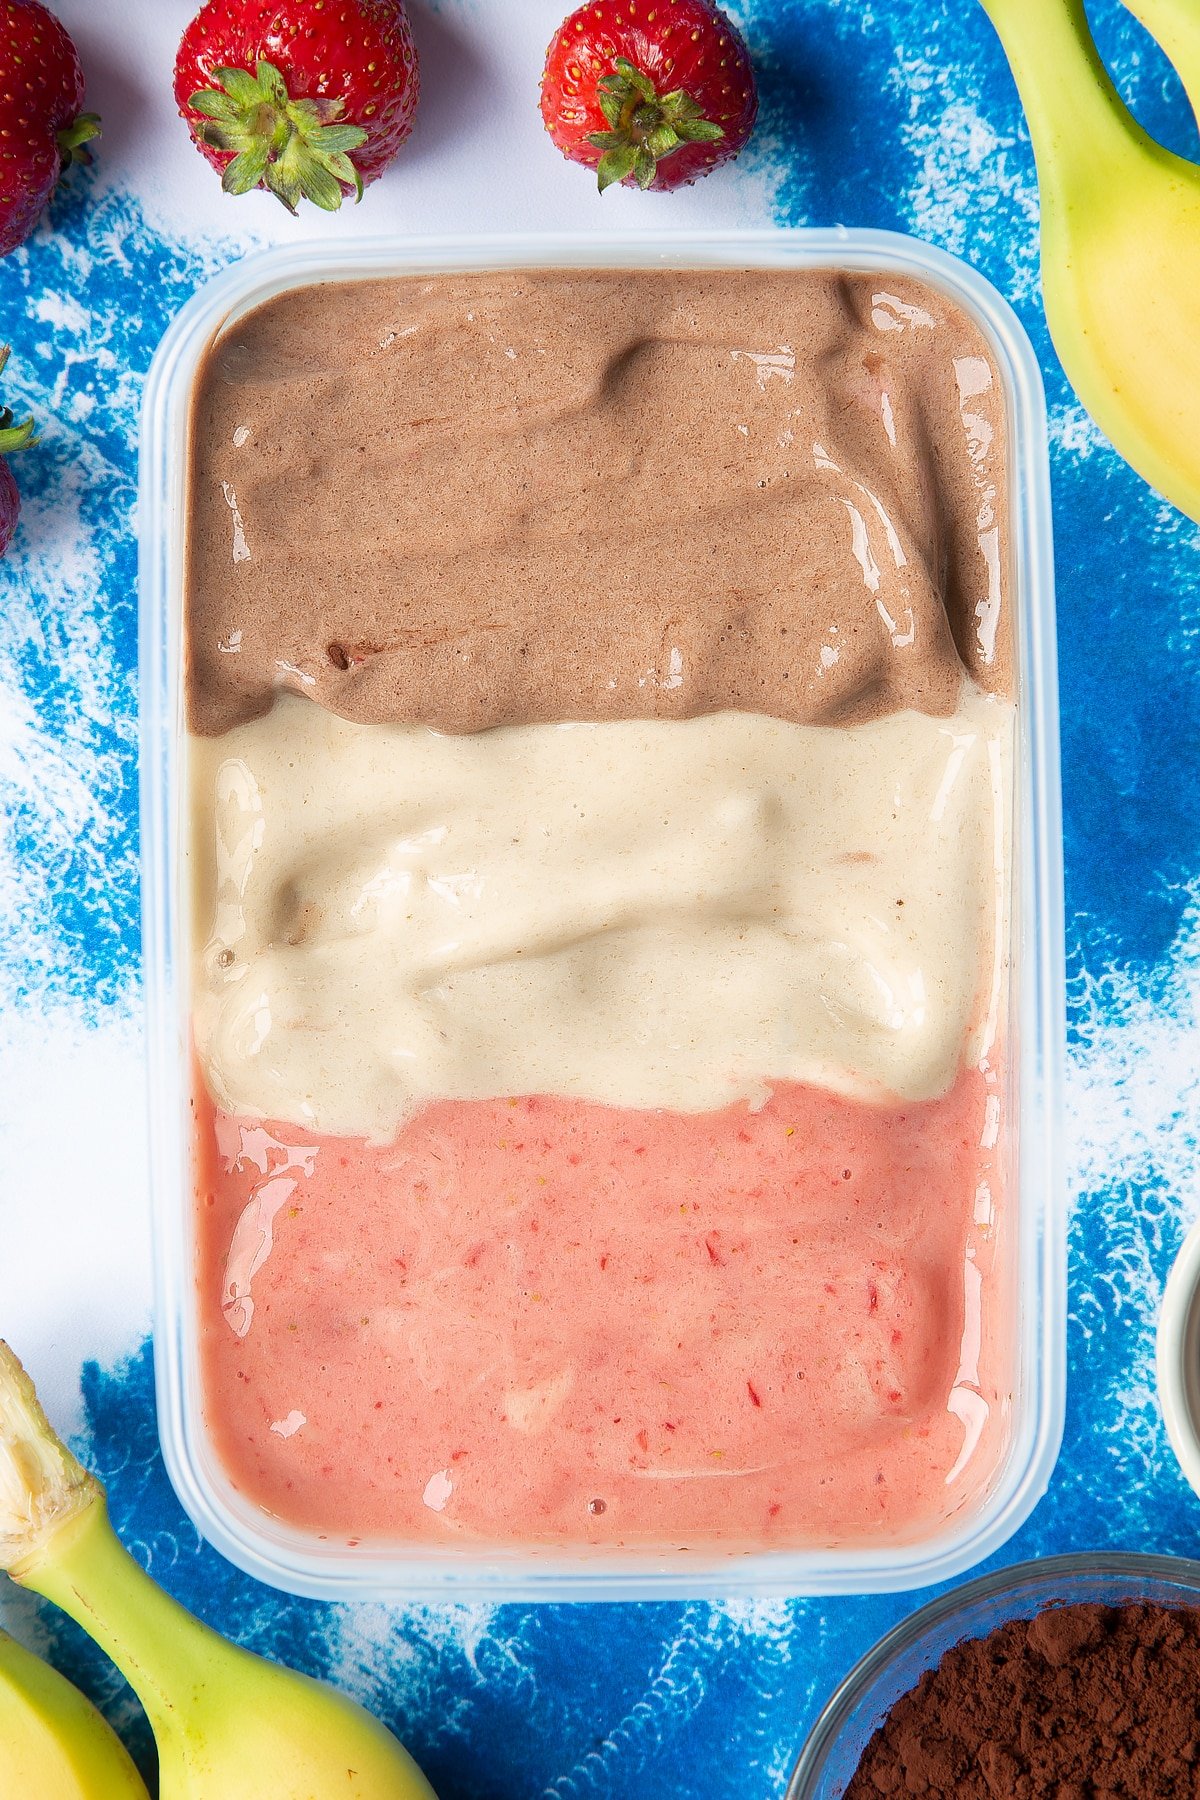 Banana ice cream arranged in three rows in a tub - one chocolate, one vanilla and one strawberry.